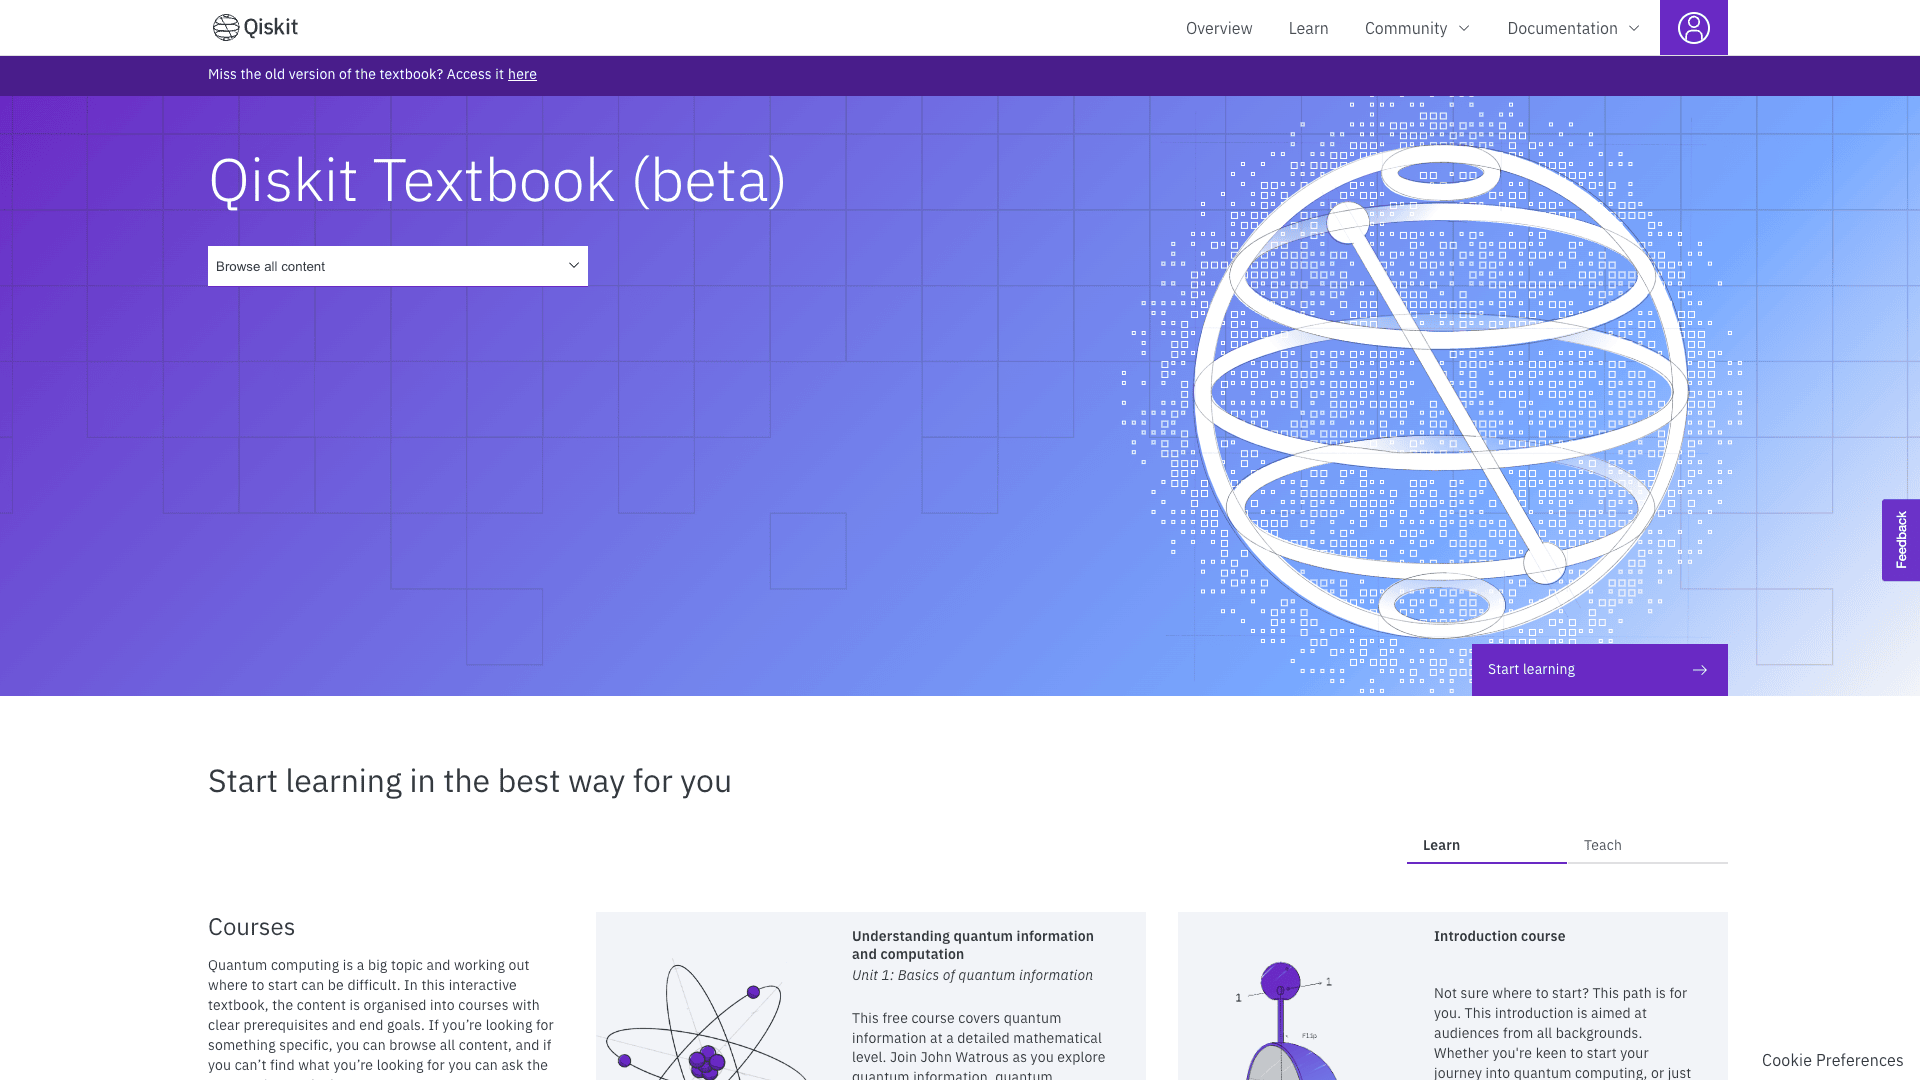 The Textbook beta landing page offers links to many different courses